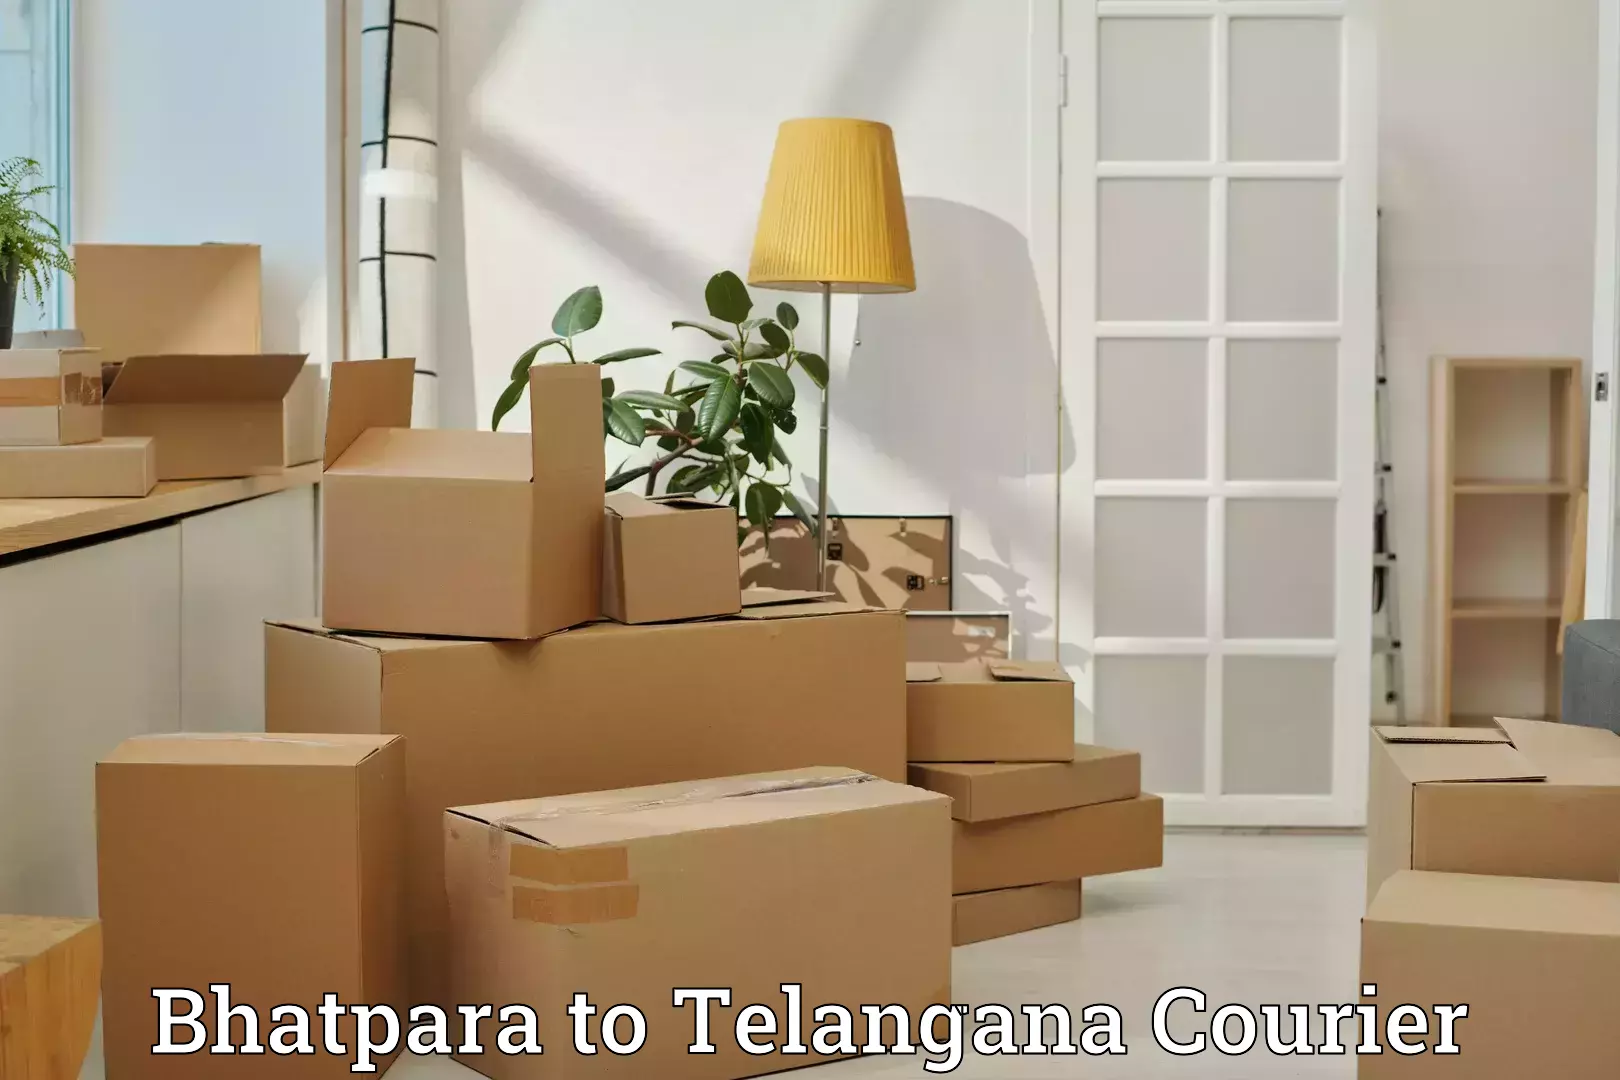 Luggage shipment specialists Bhatpara to Metpally